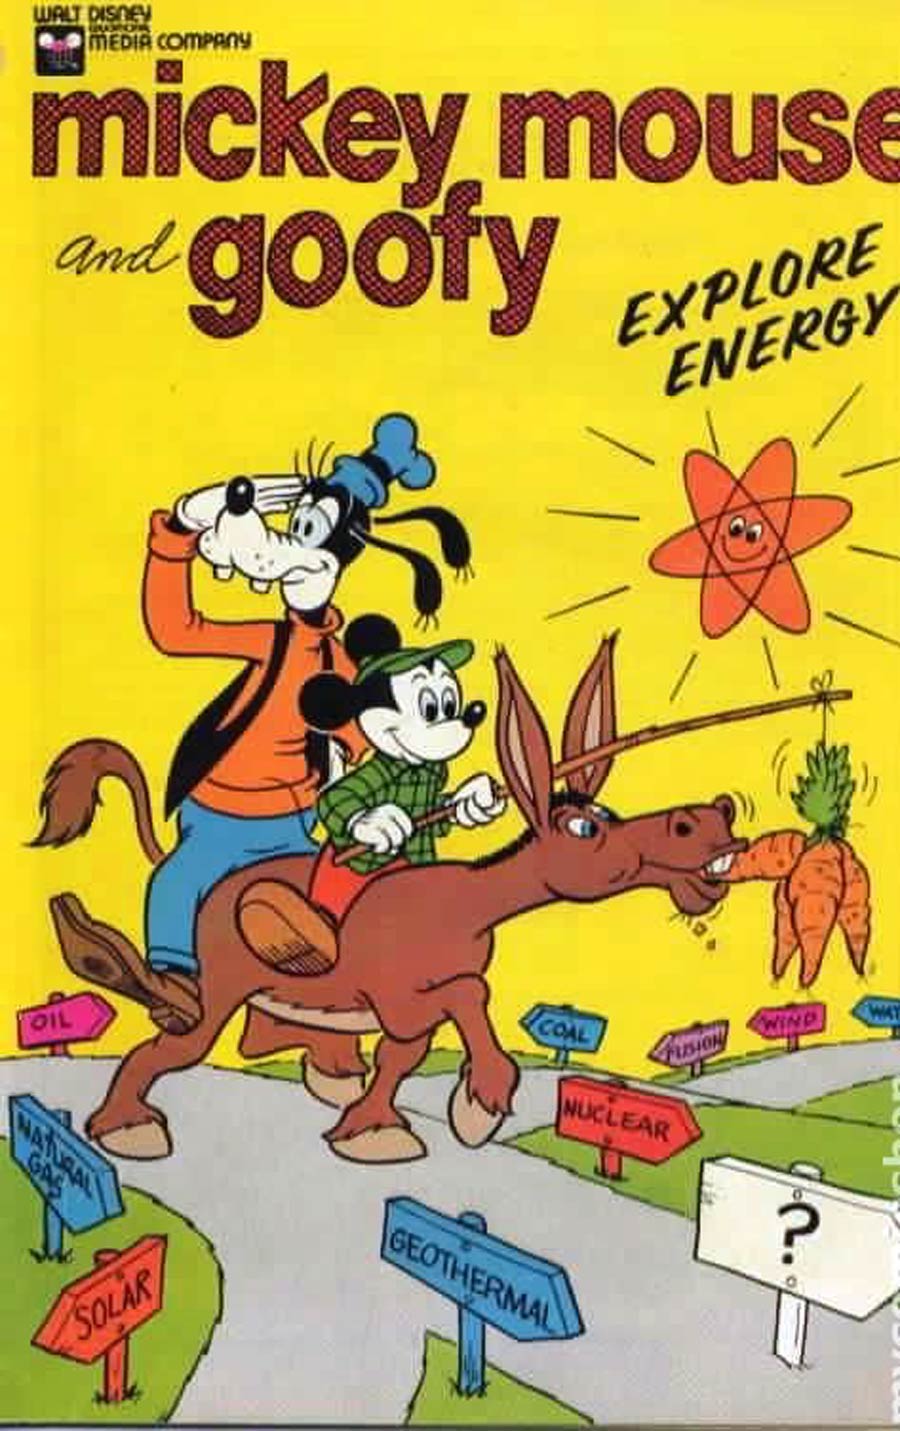 Mickey Mouse And Goofy Explore Energy Exxon Giveaway (1976-1978)